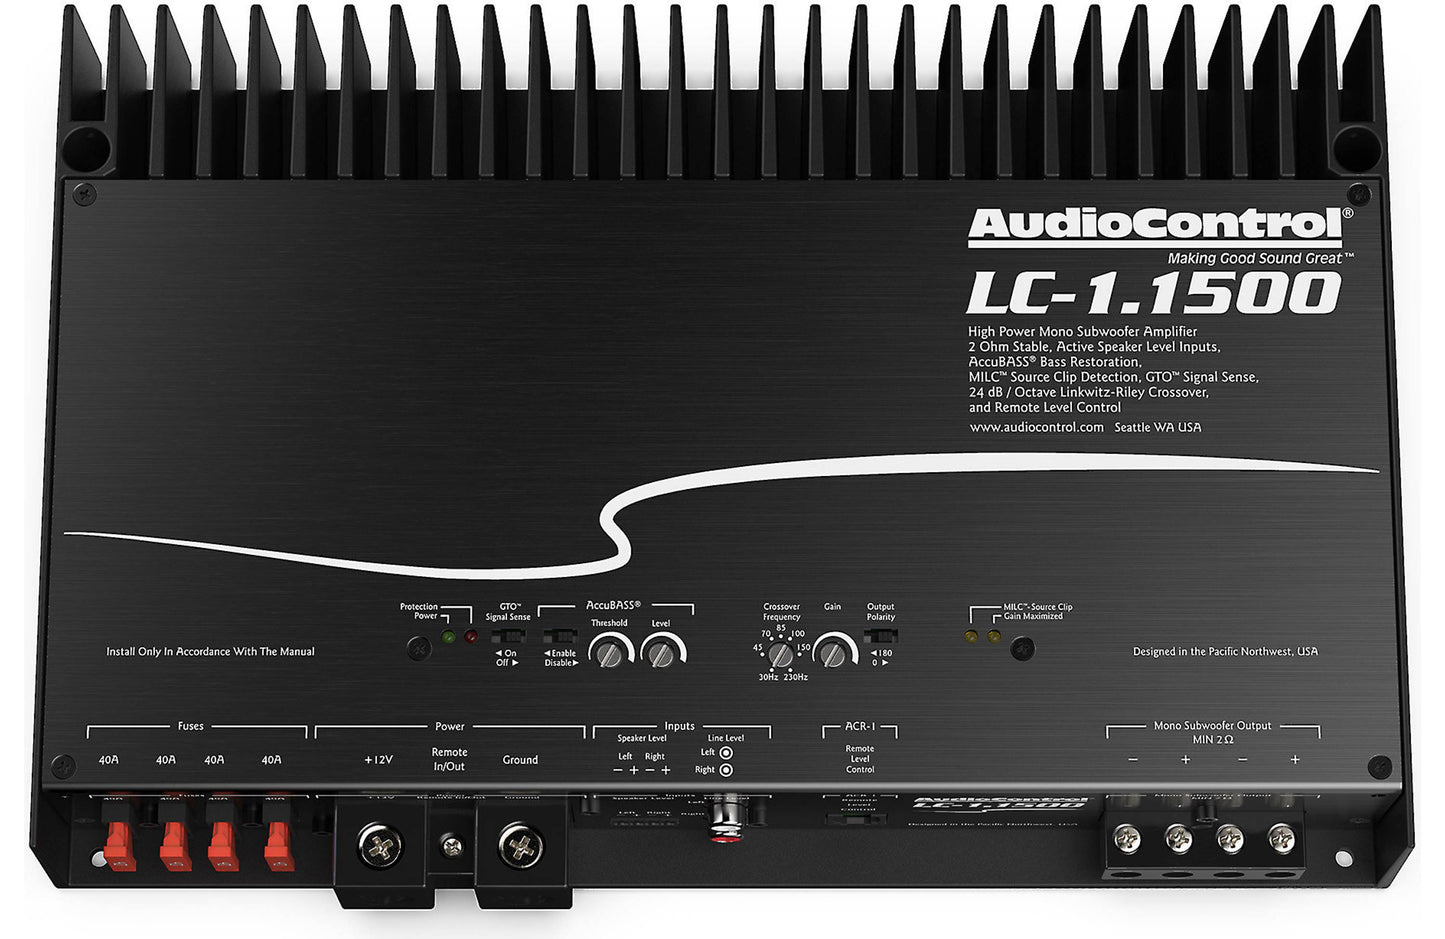 AudioControl LC-1.1500 Mono subwoofer amplifier — 1,500 watts RMS x 1 at 2 ohms